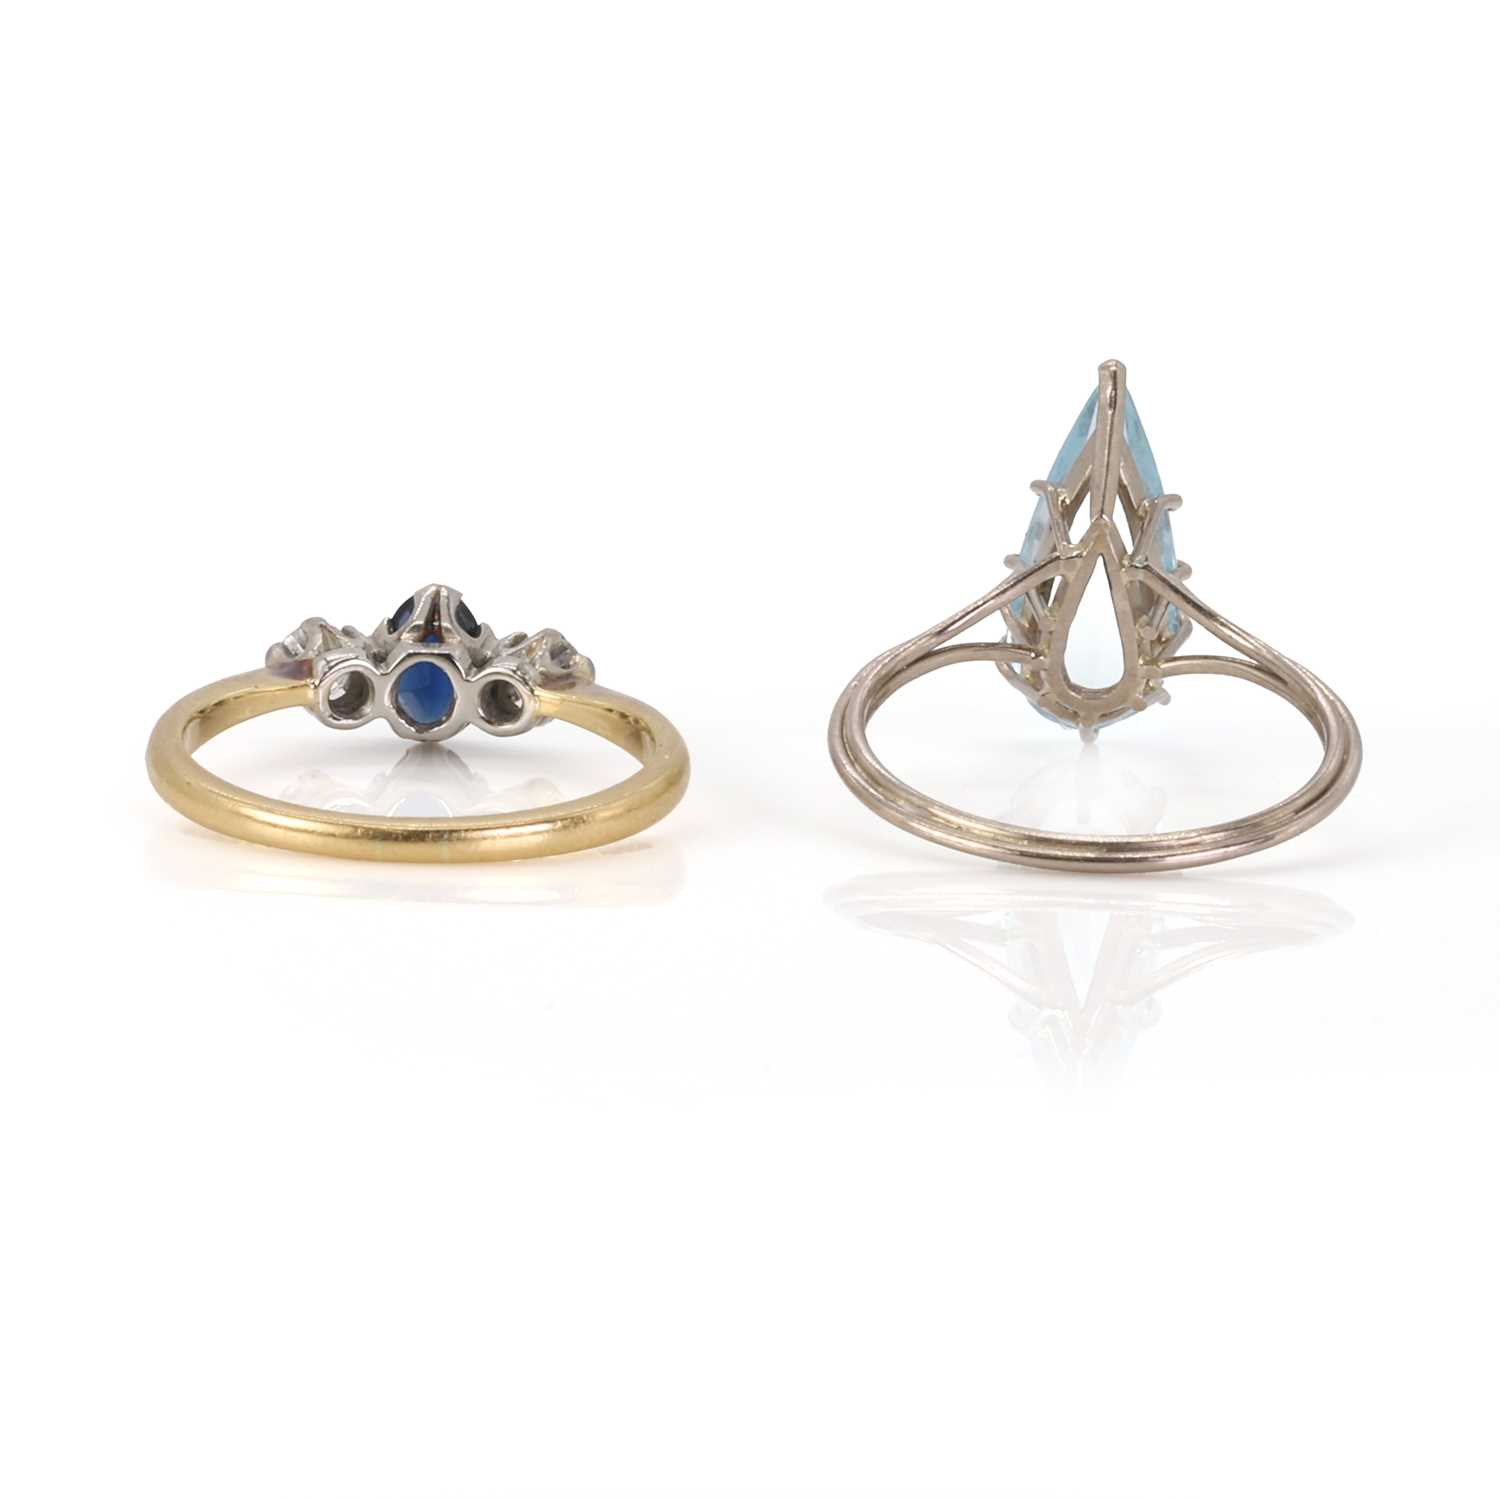 A white gold aquamarine ring and a gold sapphire and diamond ring, - Image 3 of 3